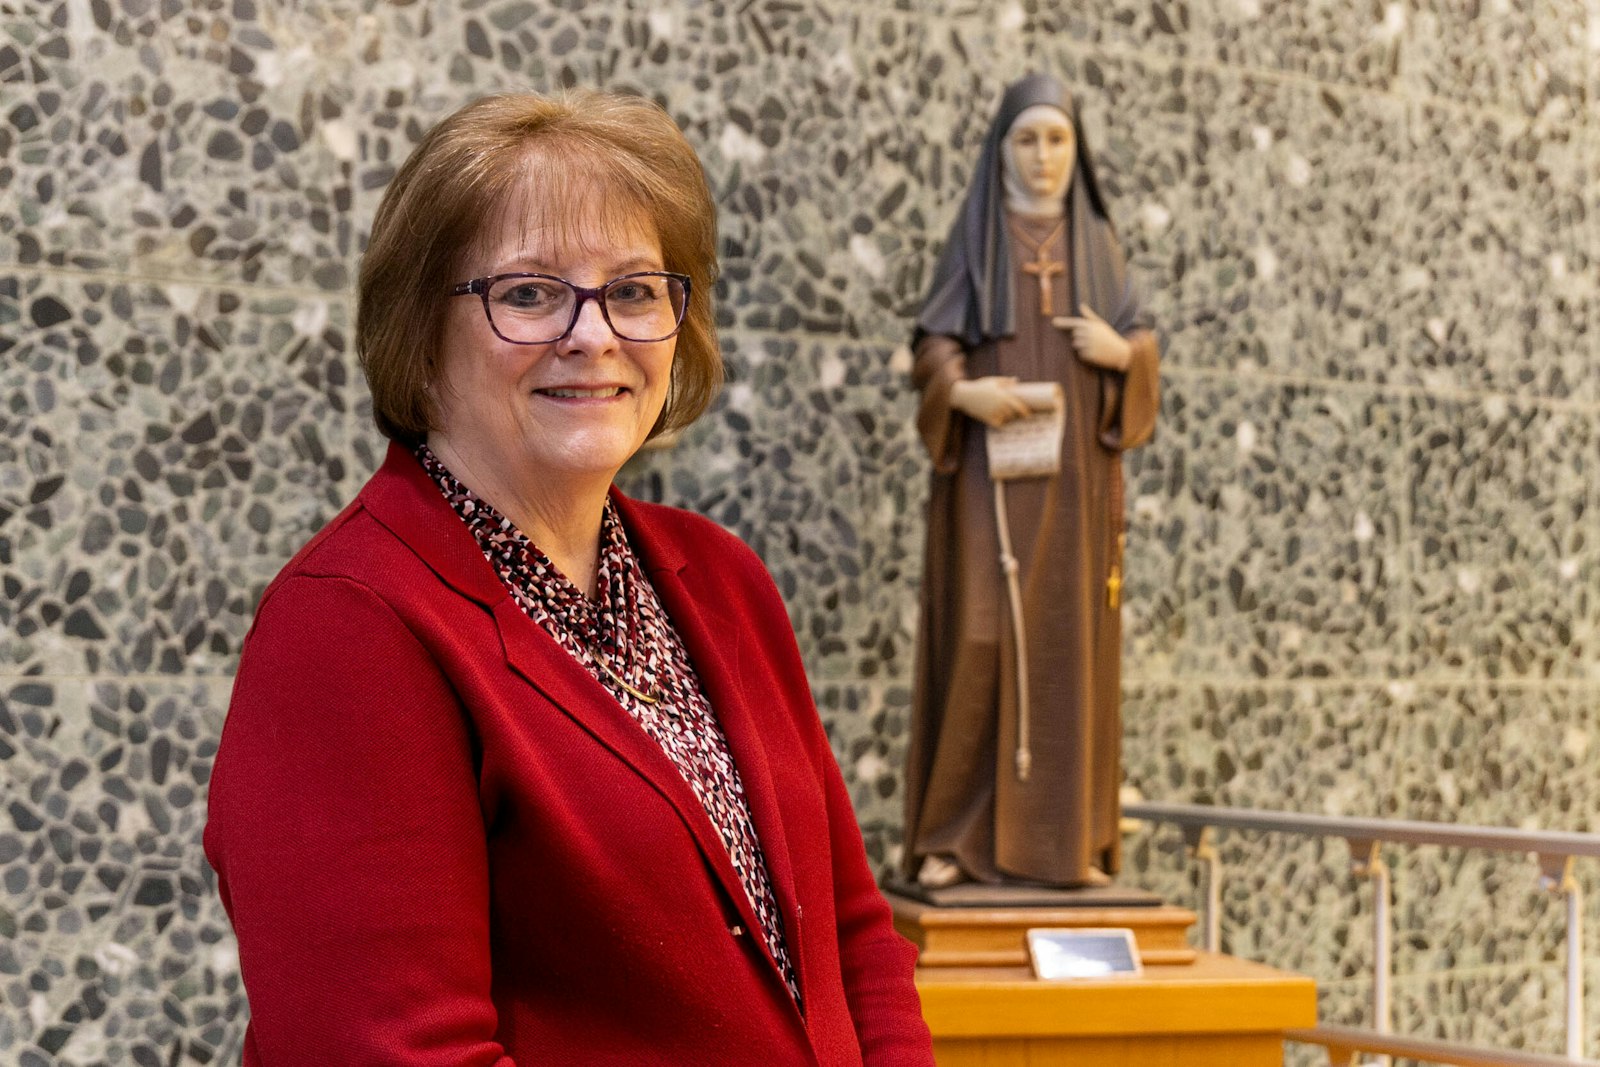 Burnett, a parishioner at St. Kateri Tekakwitha Parish in Dearborn, said she carries the Franciscan values of service to those in need in her pastoral care. She is pictured with a statue of St. Clare of Assisi at Madonna University in Livonia.